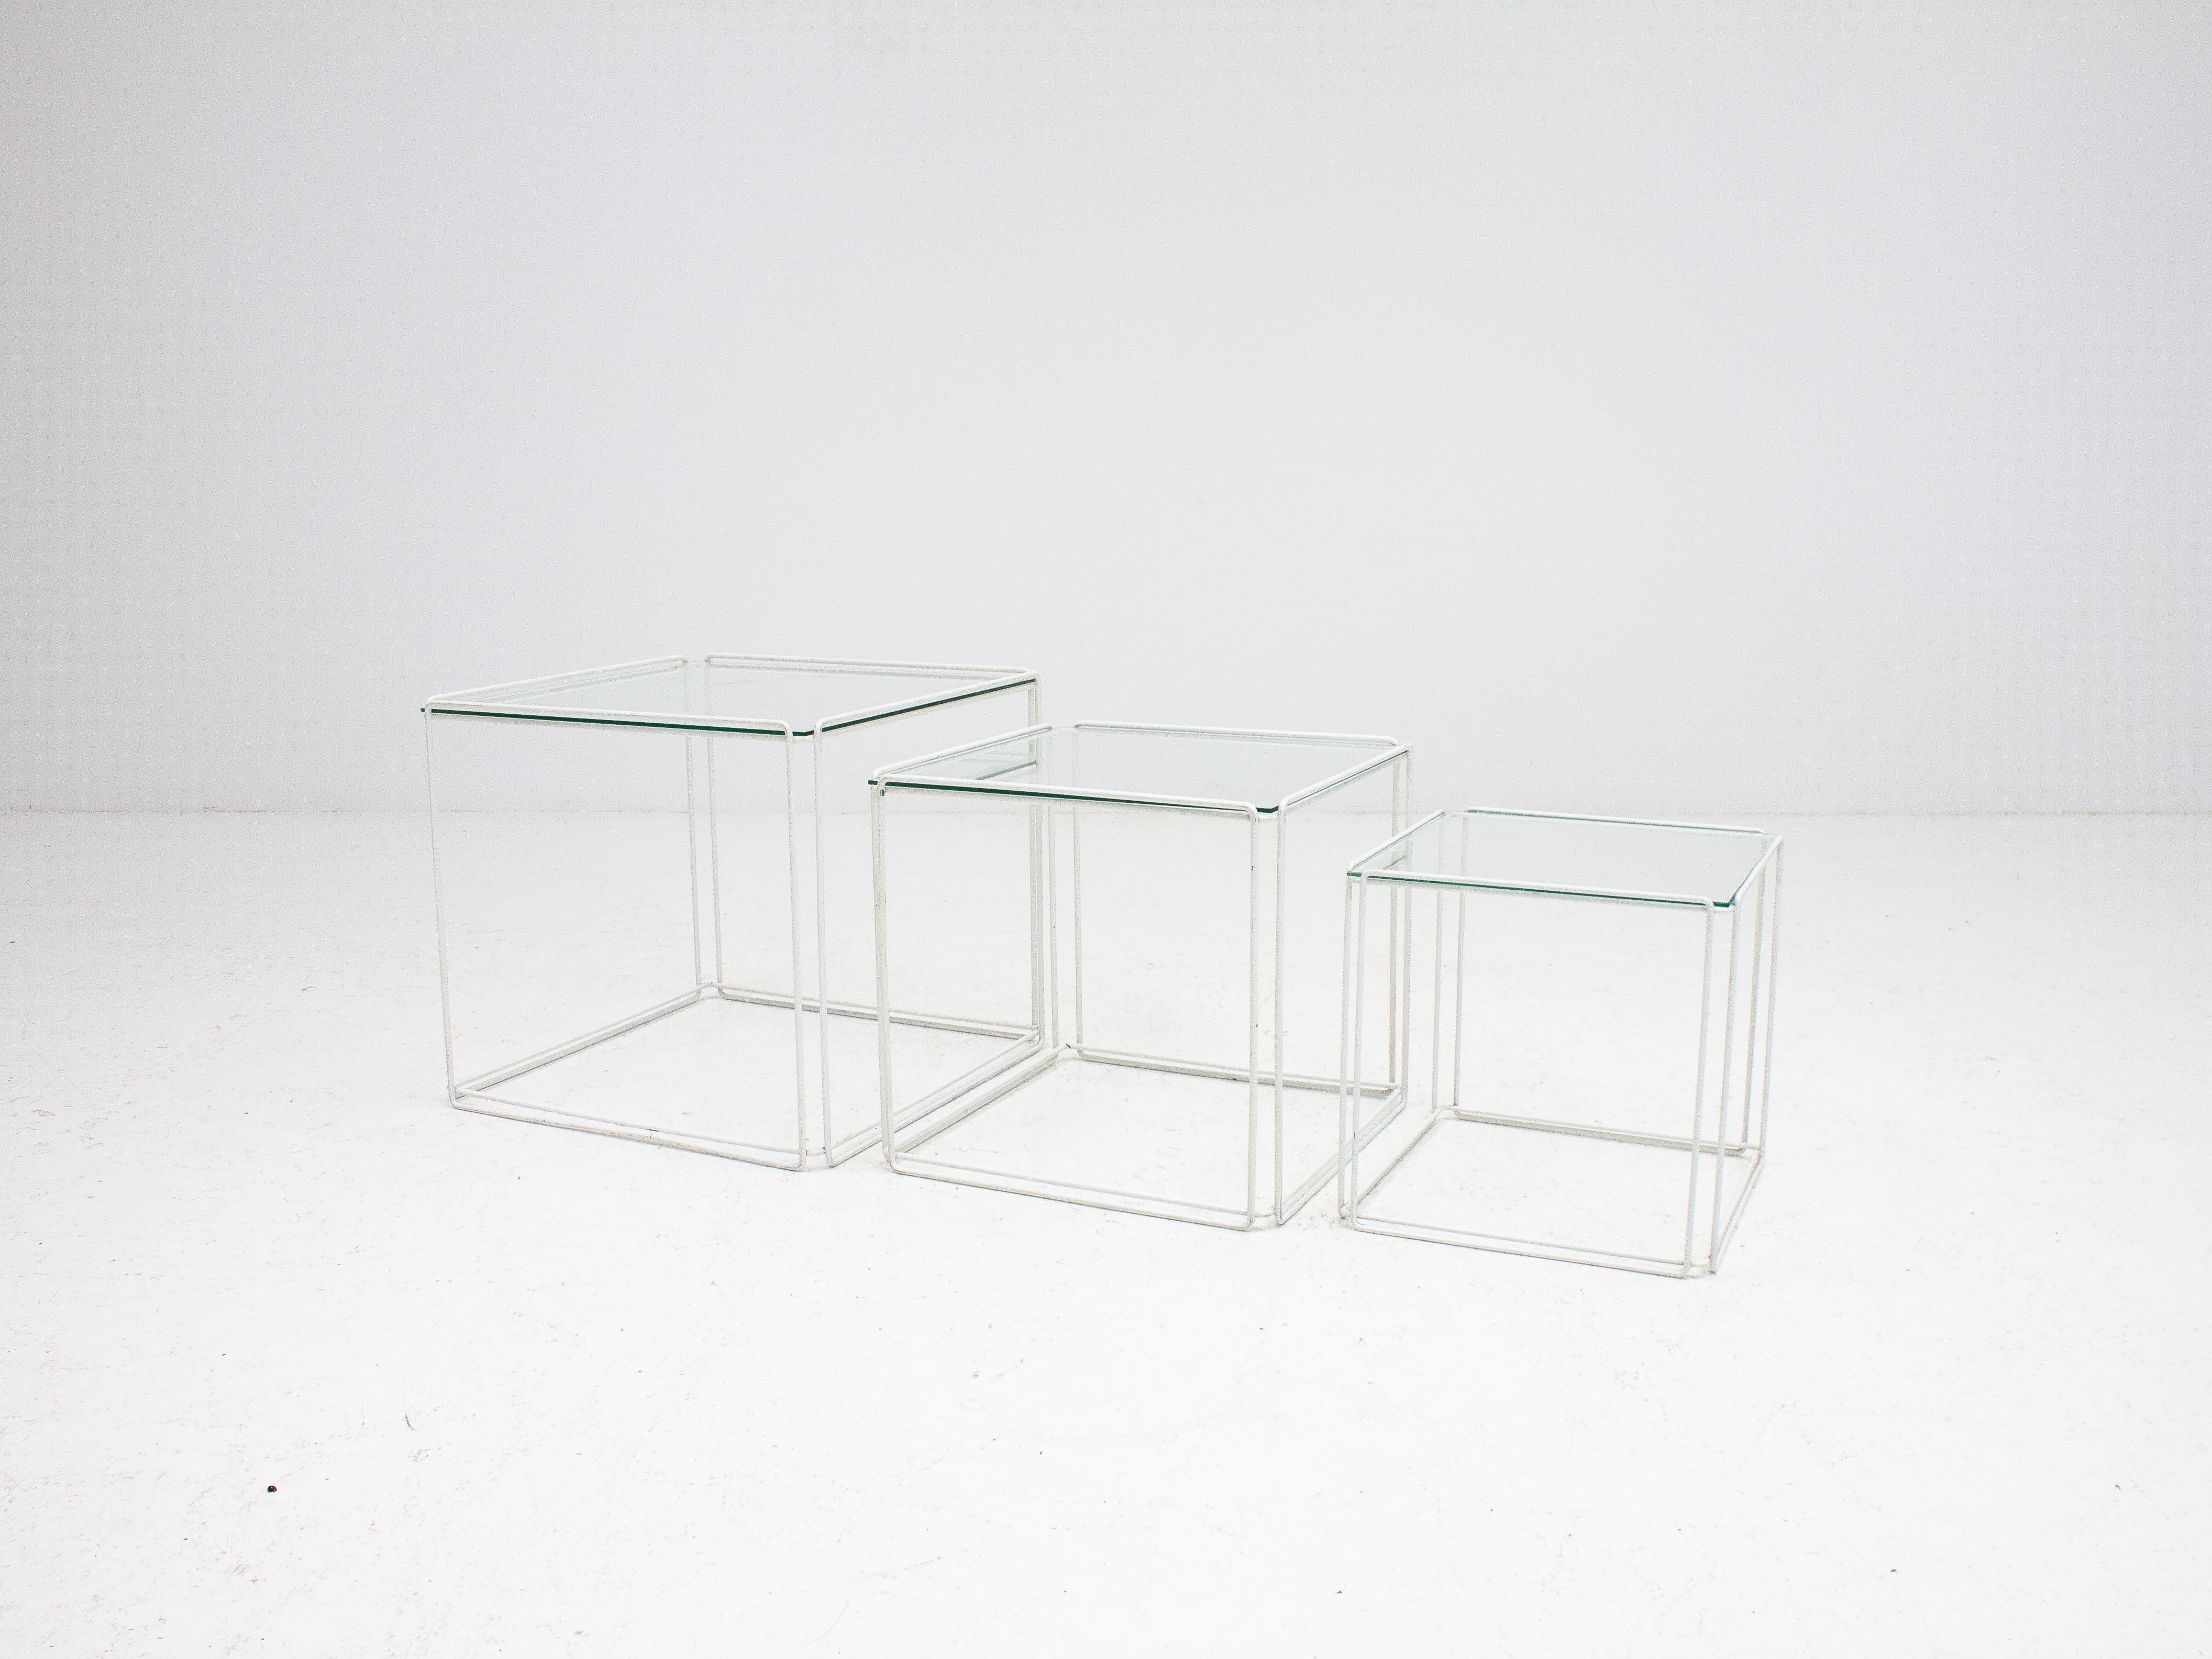 A very well recognized piece of French design by Max Sauze, with white lacquered wireframes and glass tops the 'Isoceles' nest of tables have a very Minimalist graphical appearance.

This piece has medium wear, some small areas of chipped